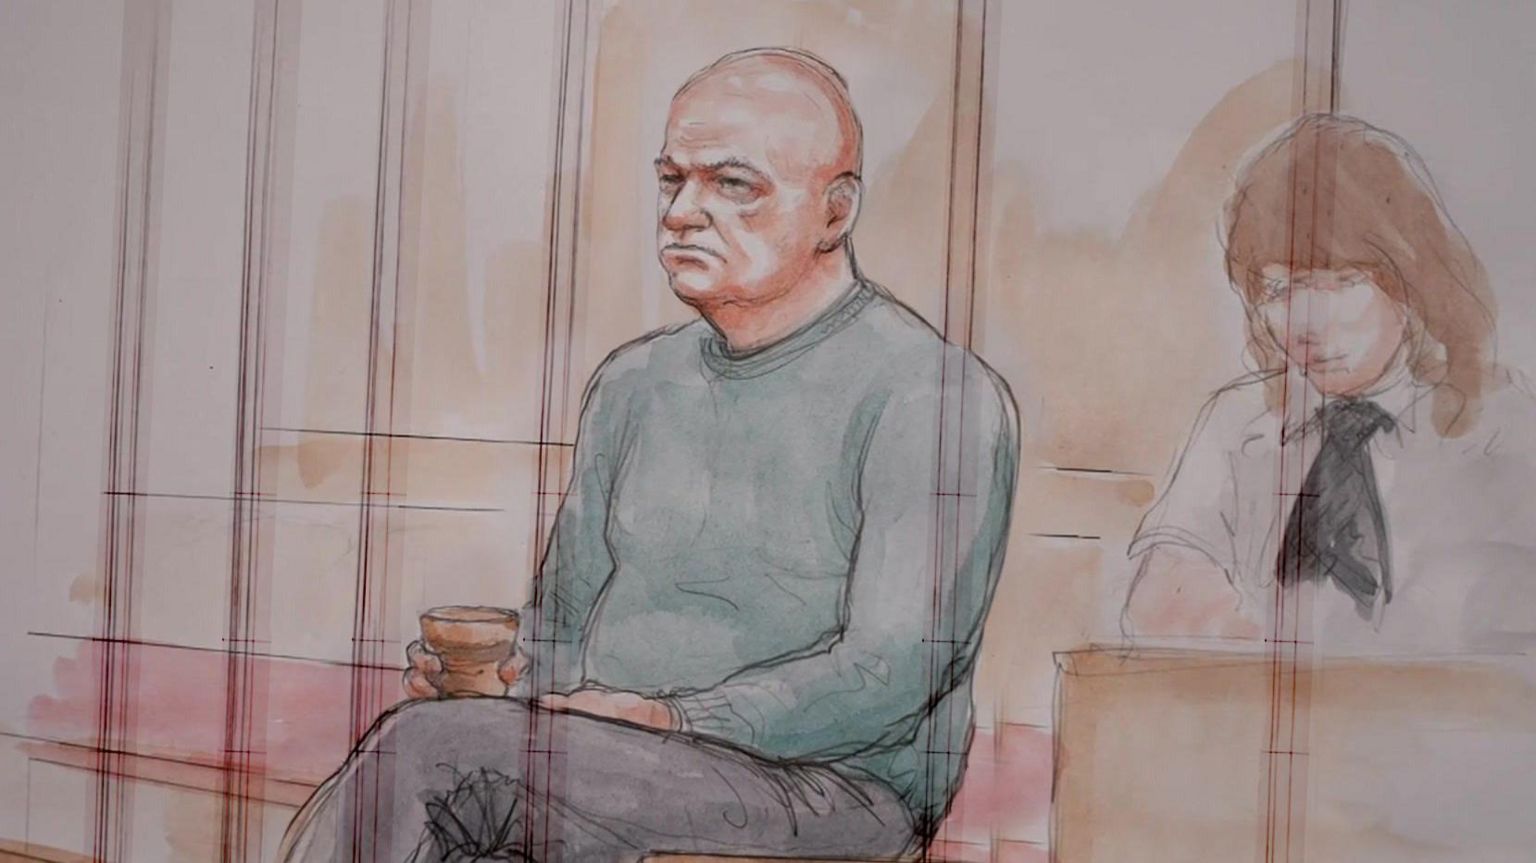 A court artist sketch of Neil Foden sitting in the dock, frowning, with one leg crossed over the other and a glass of water in his hand